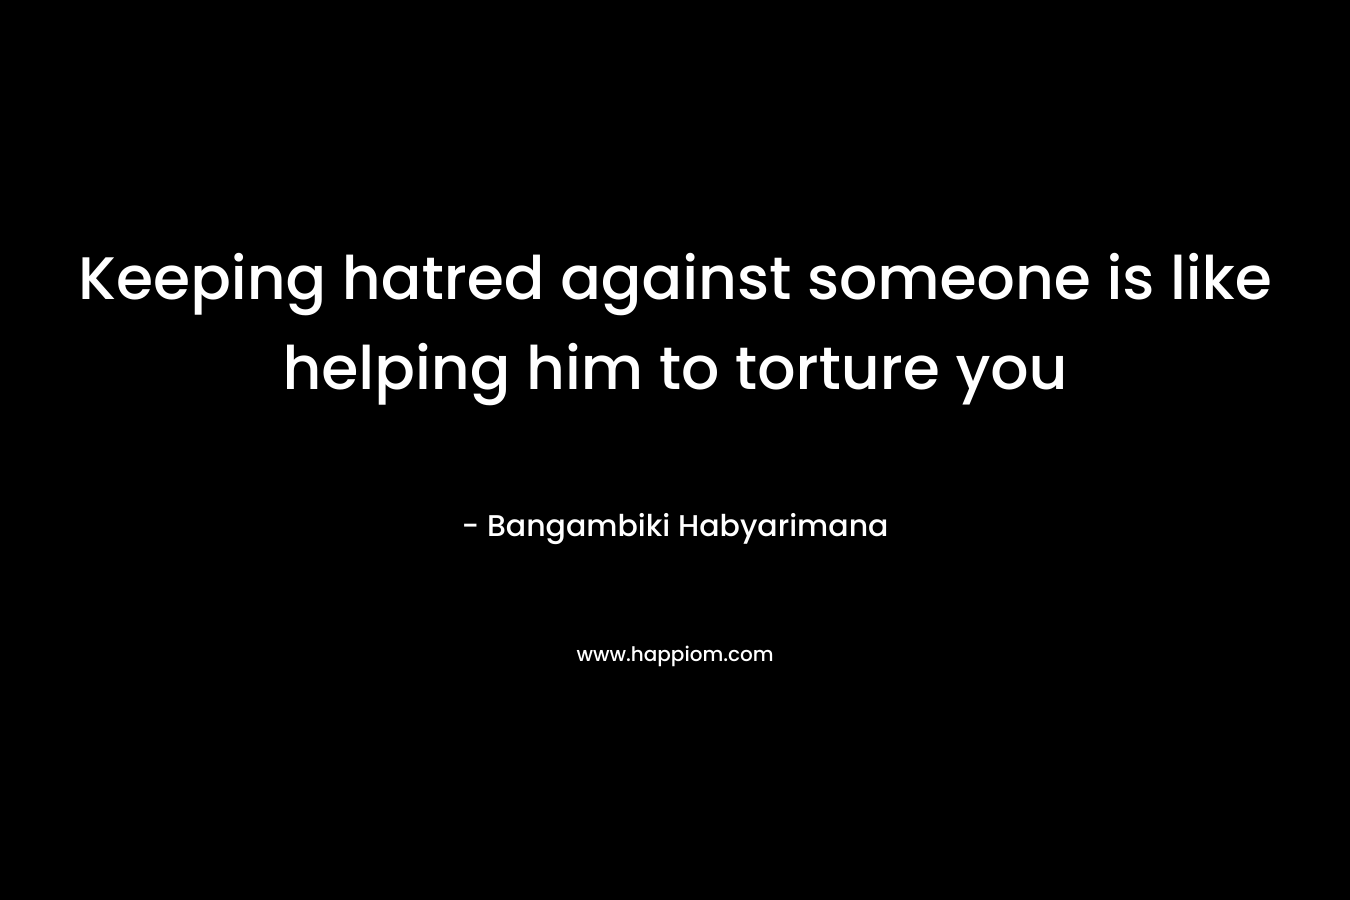 Keeping hatred against someone is like helping him to torture you – Bangambiki Habyarimana